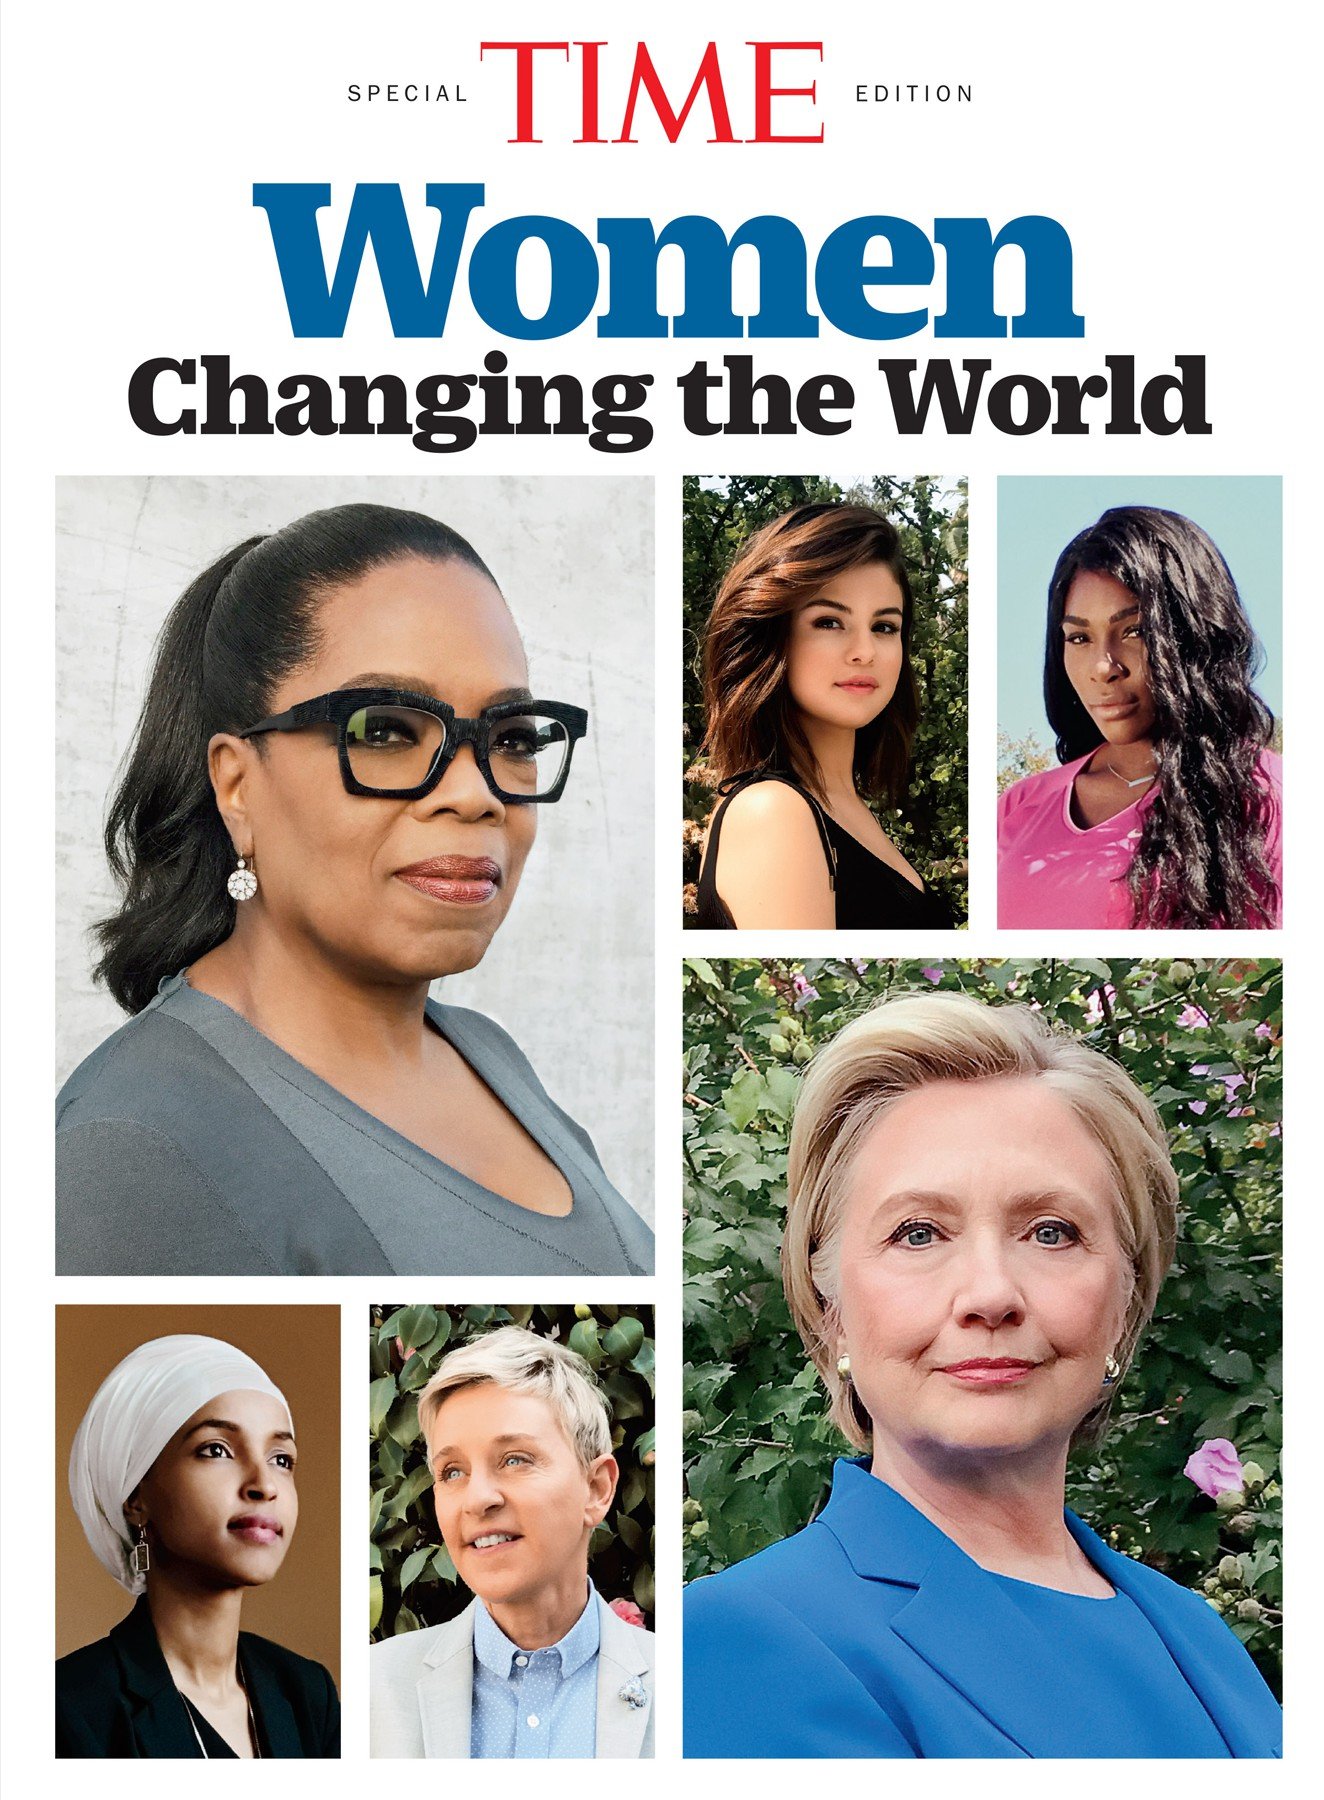 Woman is change. Time woman of the year. Meantime woman. Changed woman.